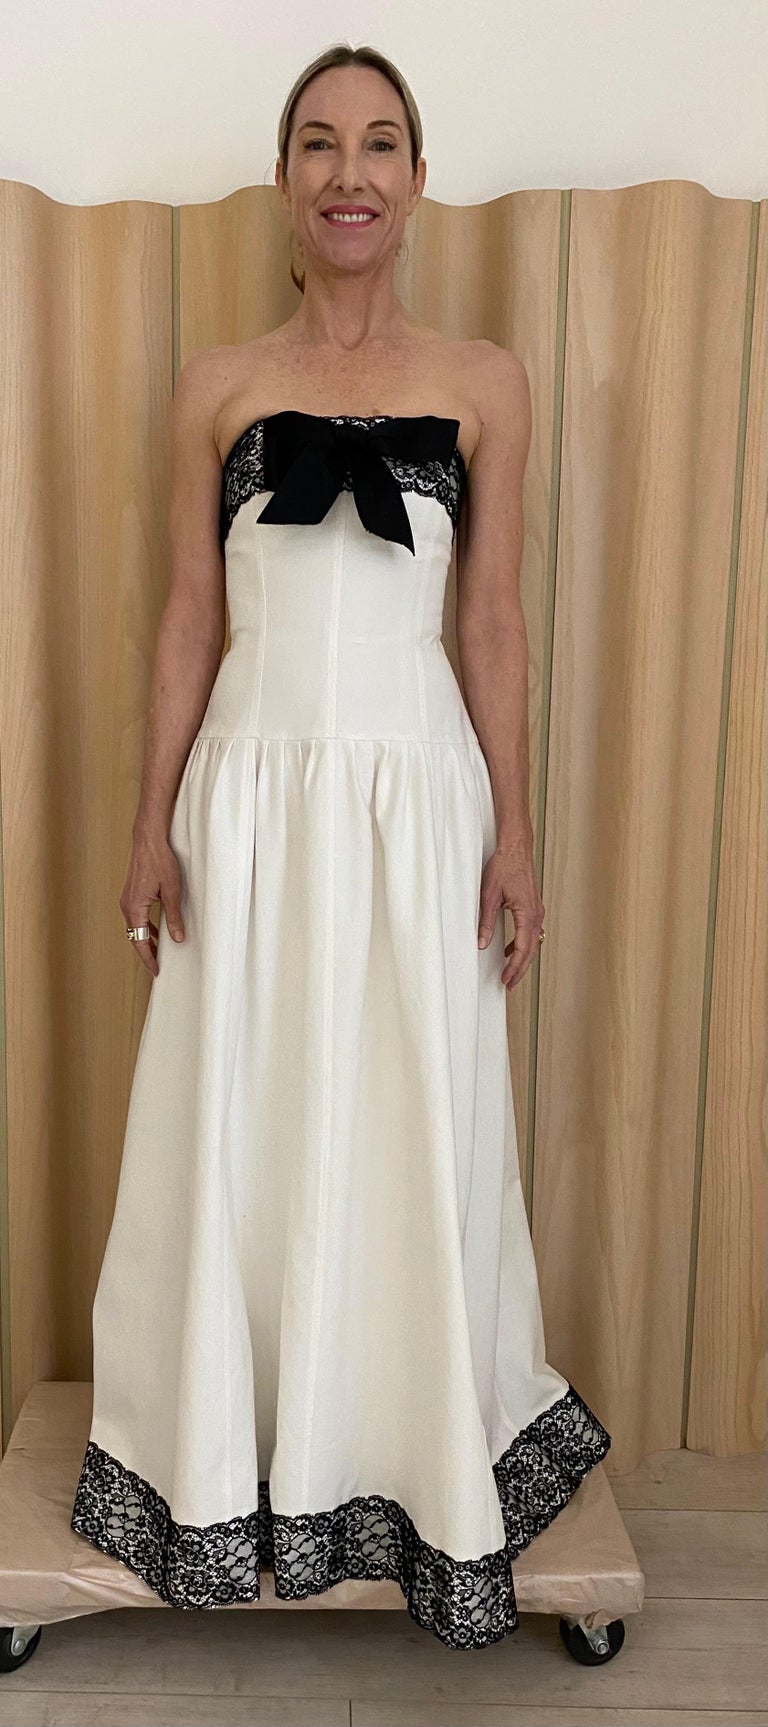 CHANEL, White Pre-Fall 2019 Belted Short Cocktail Dress Size 6 (S)